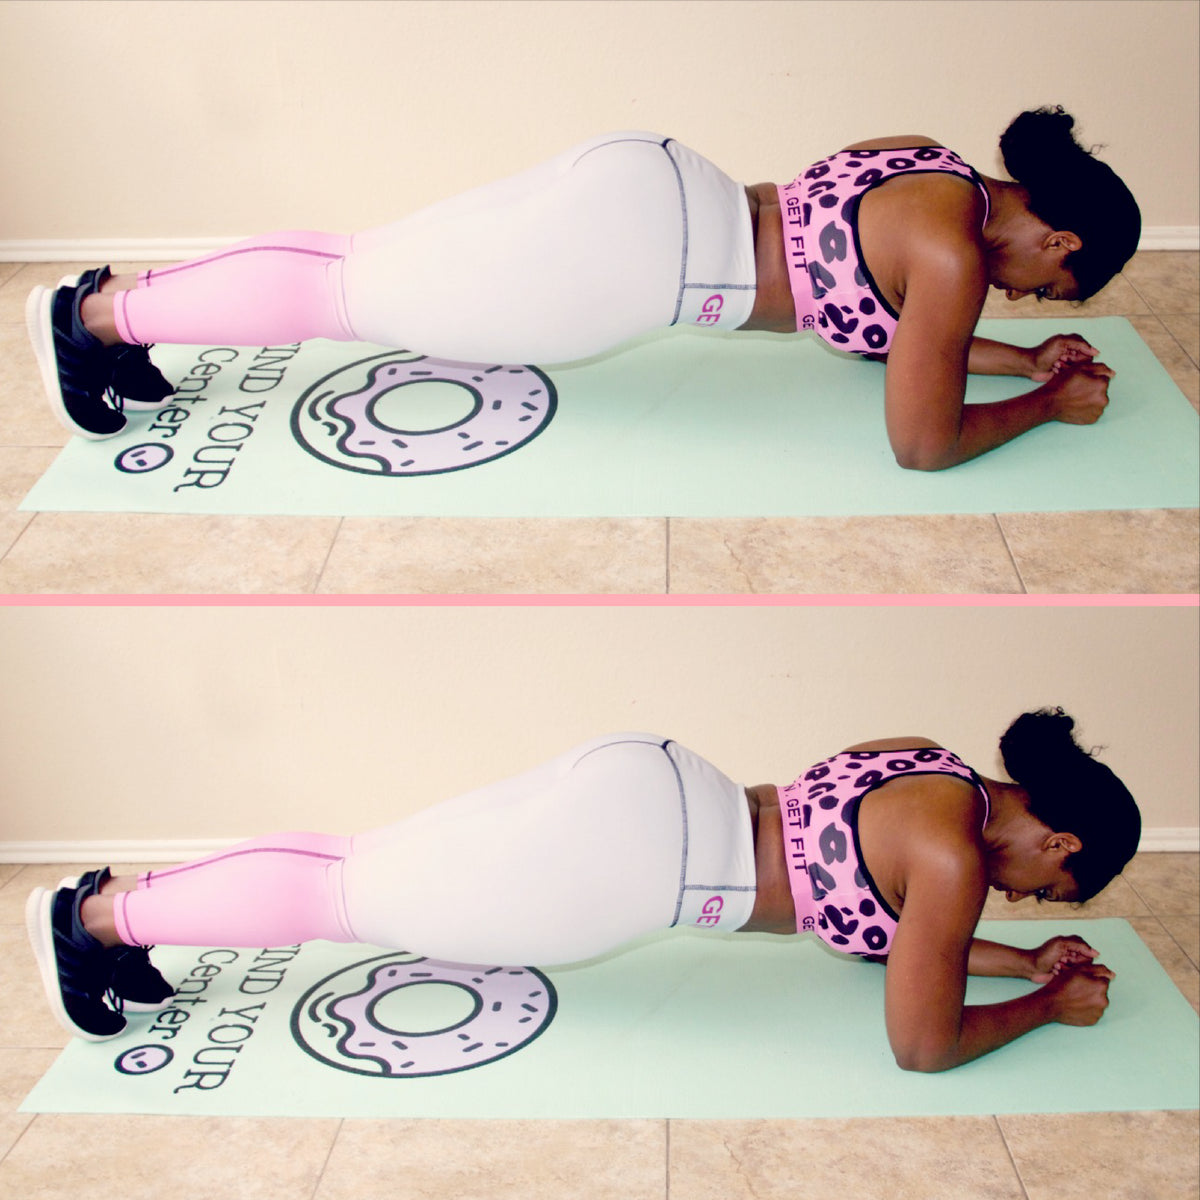 elbow plank formation